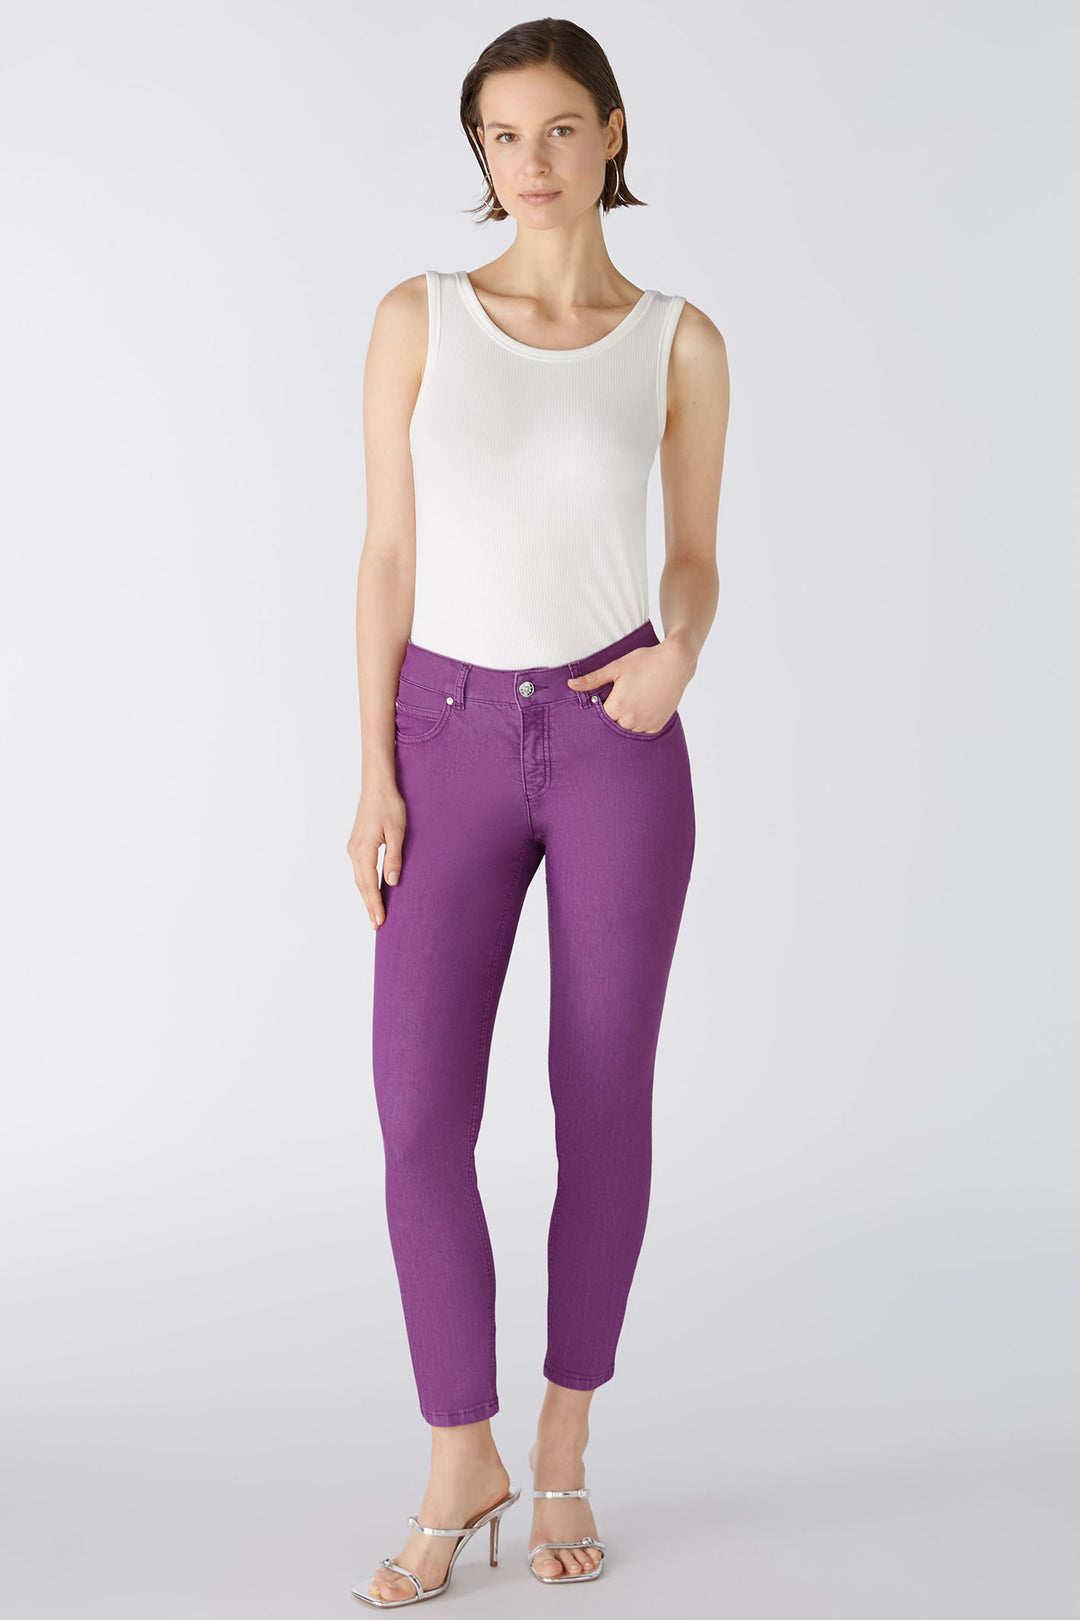 Oui 79920 Baxtor Sparkling Grape Purple Cropped Jeggings - Shirley Allum Boutique